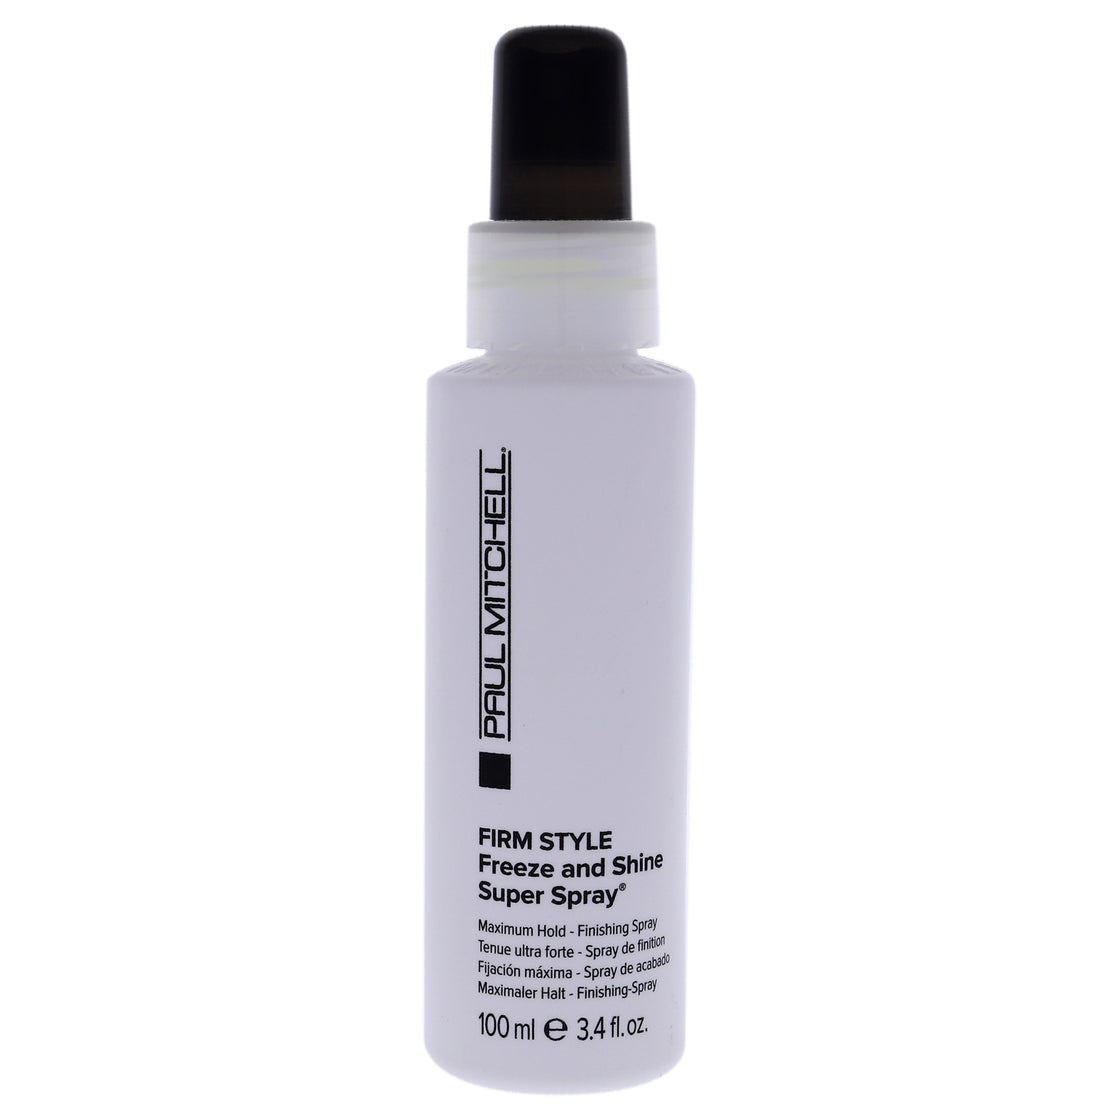 Firm Style Freeze and Shine Super Spray by Paul Mitchell for Unisex - 3.4 oz Hair Spray